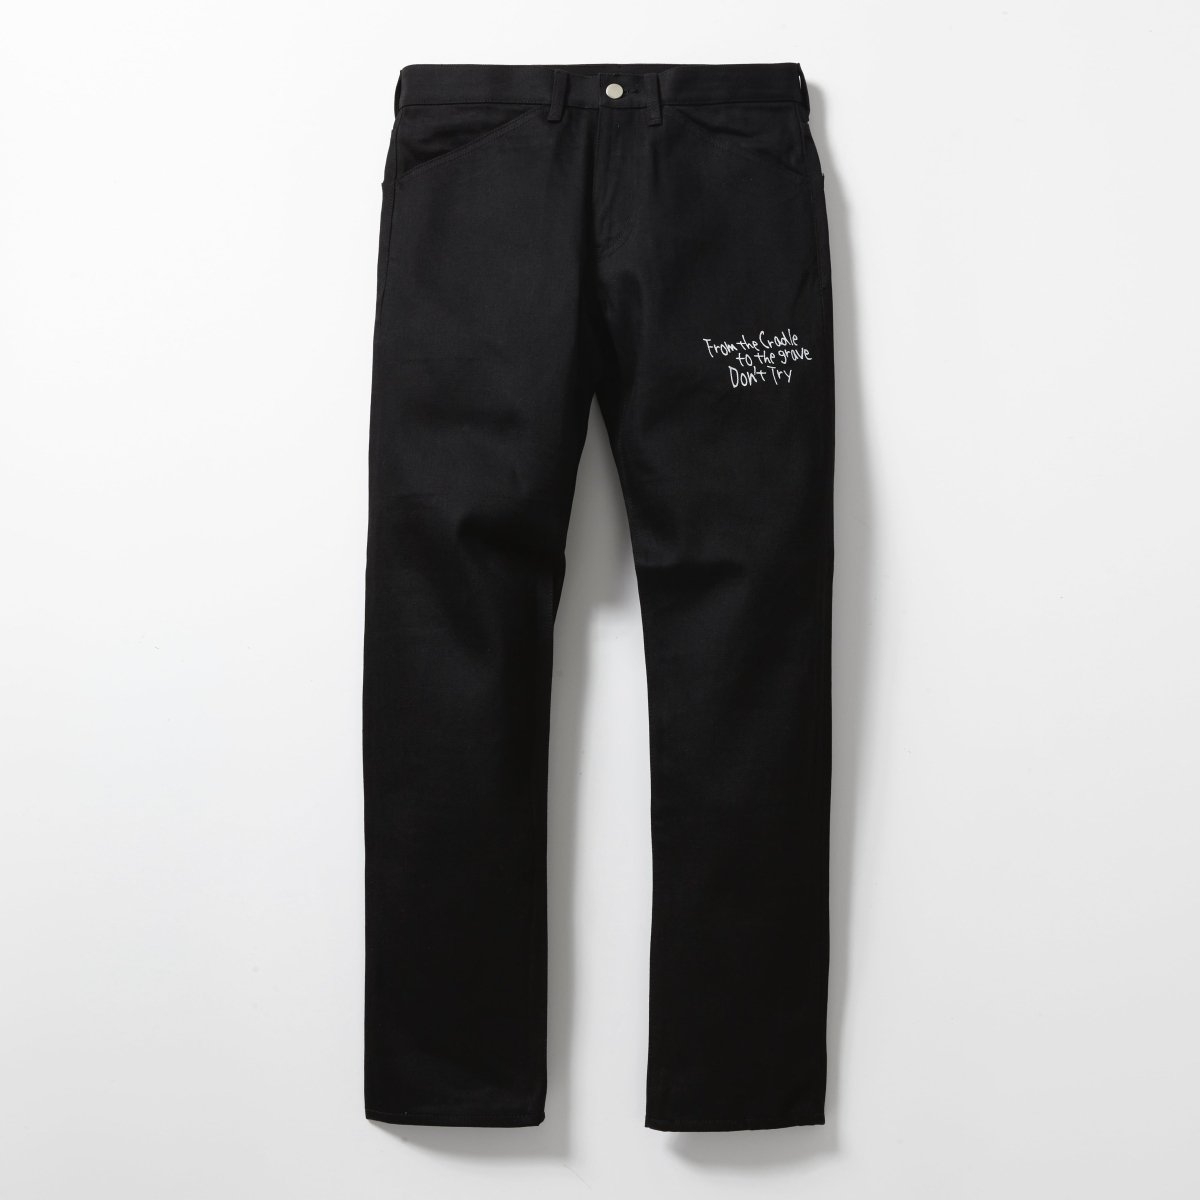 FIRST RUST<BR>STRAY DOG / SKINNY TROUSER 